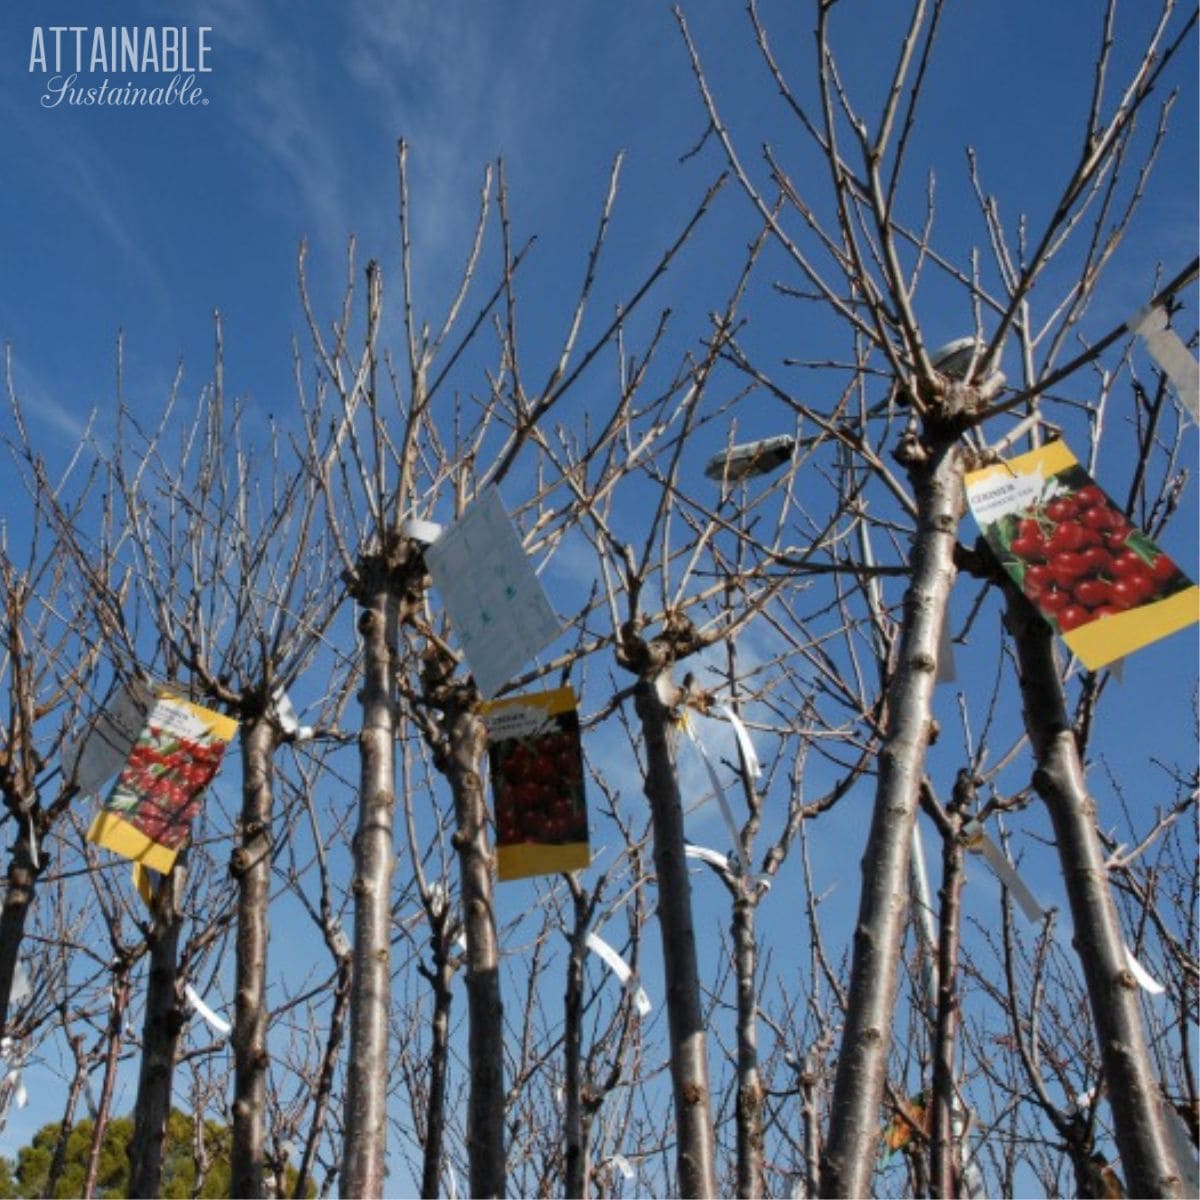 fruit trees with hang tags, blue sky in background.